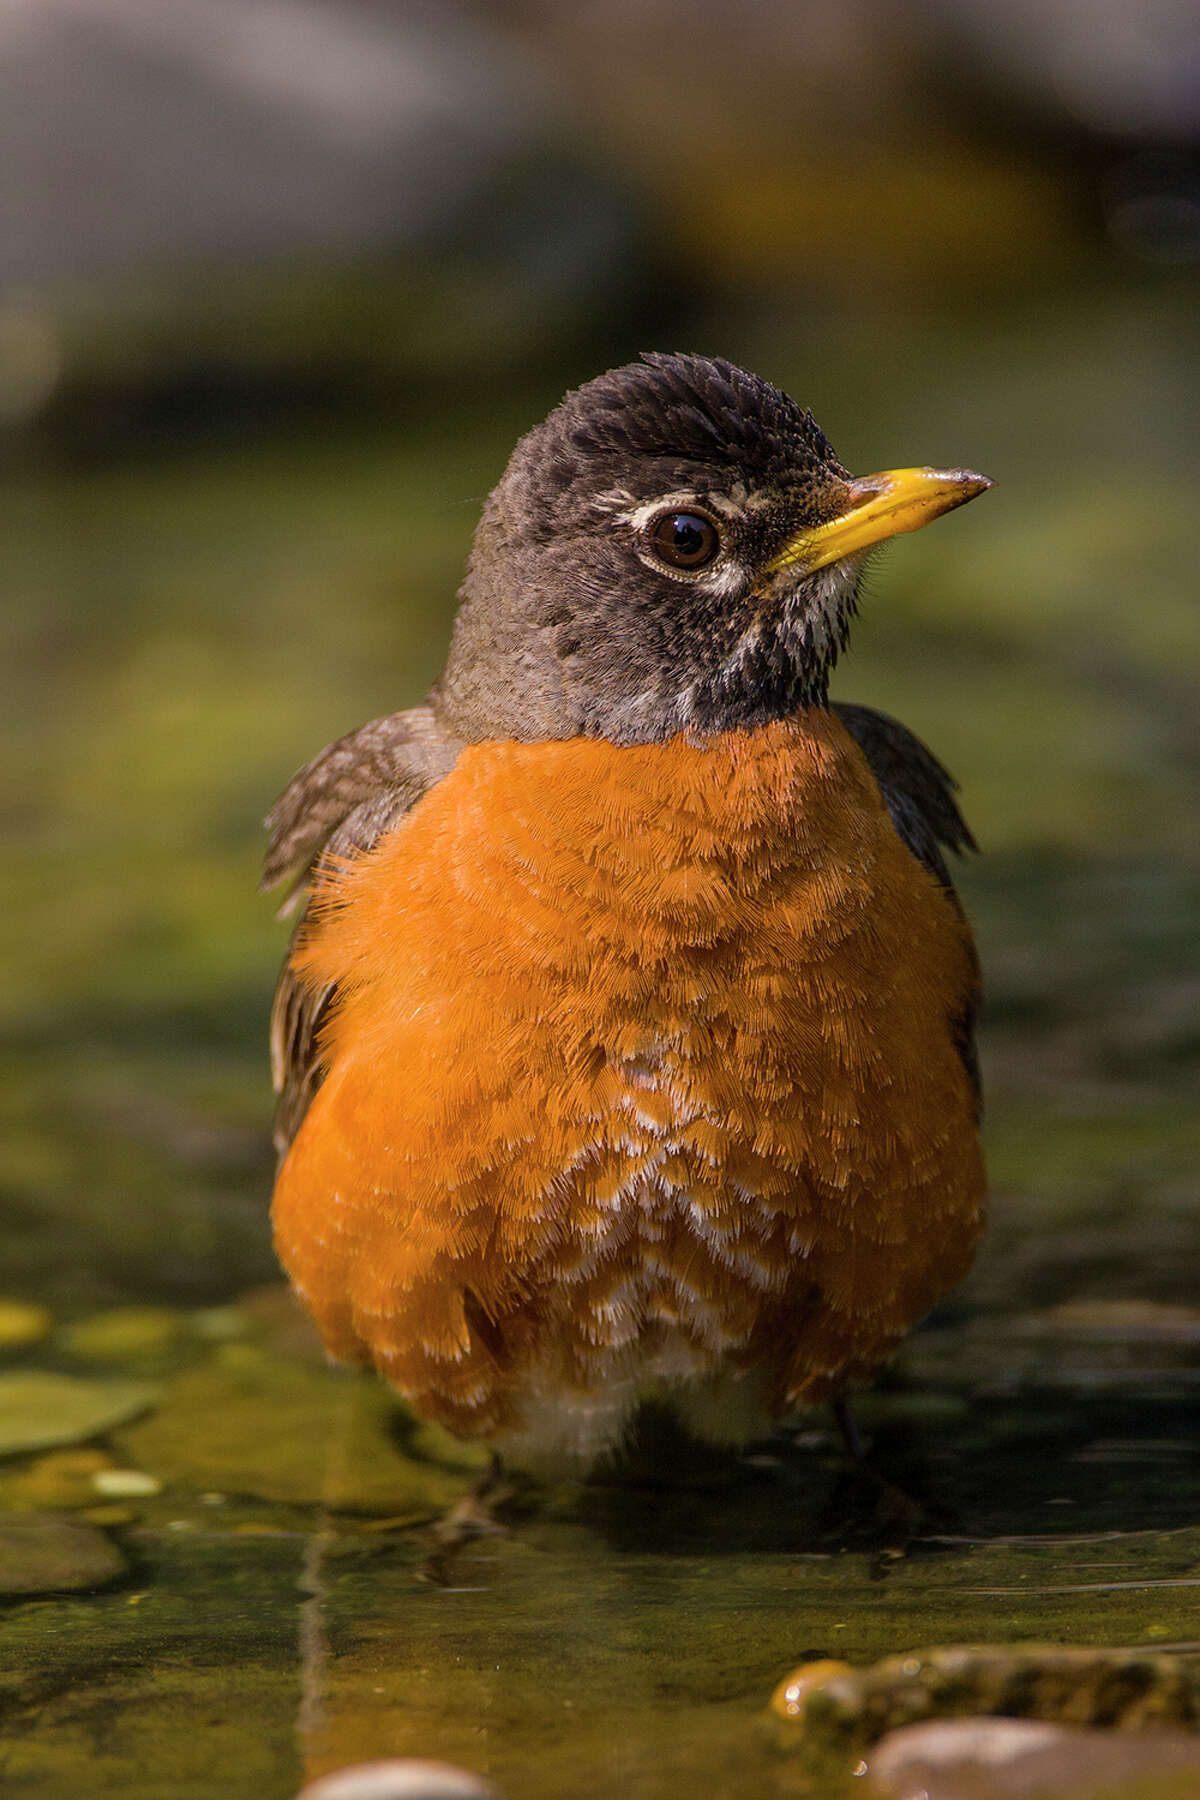 Birds like this American robin stand in water to cooldown during hot summer days. Photo Credit: Kathy Adams Clark. Restricted use.